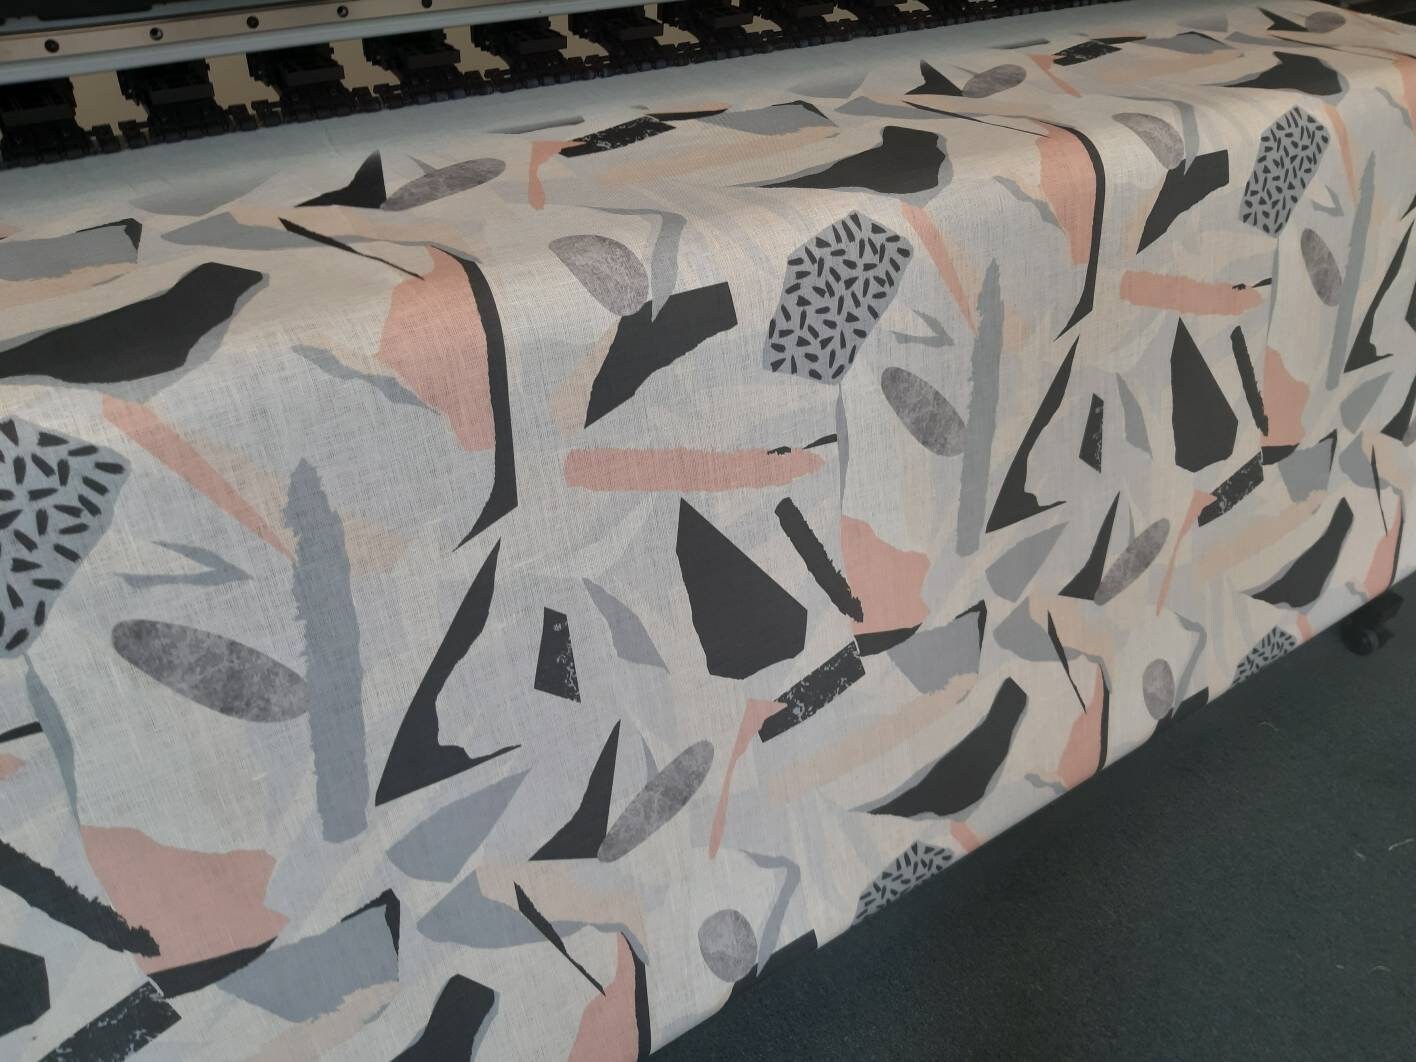 Printed Linen Fabric By The Yard Natural Linen Fabric By The Yard For Clothing & Home Textile - Width 148 cm/1.62yd